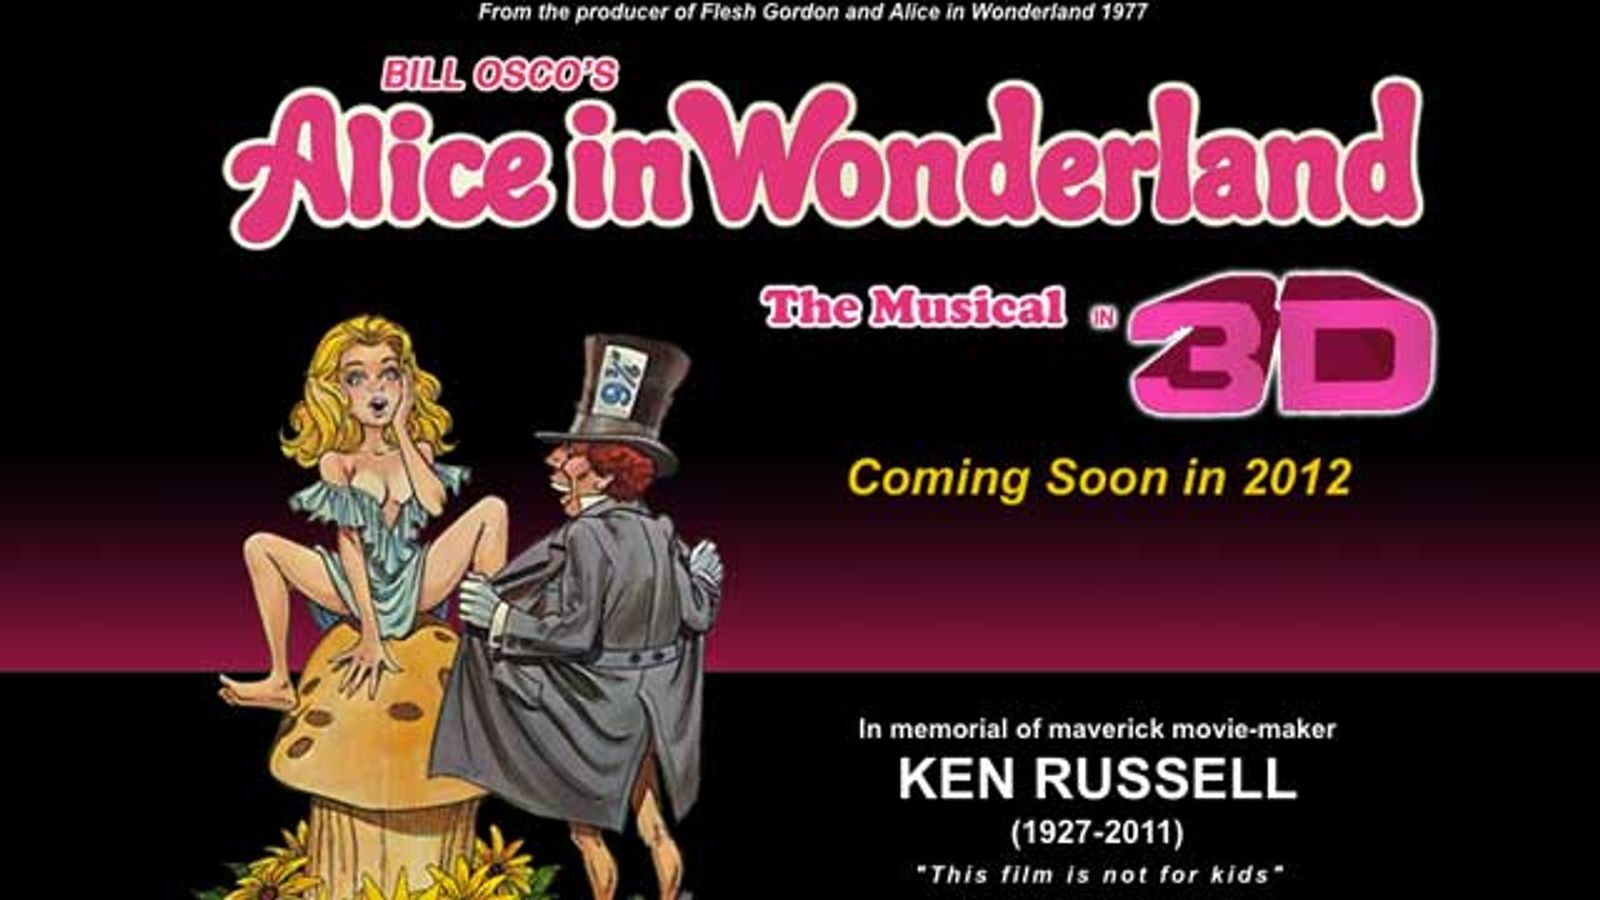 Bill Osco's X-Rated Alice in Wonderland To Be Remade... in 3D?